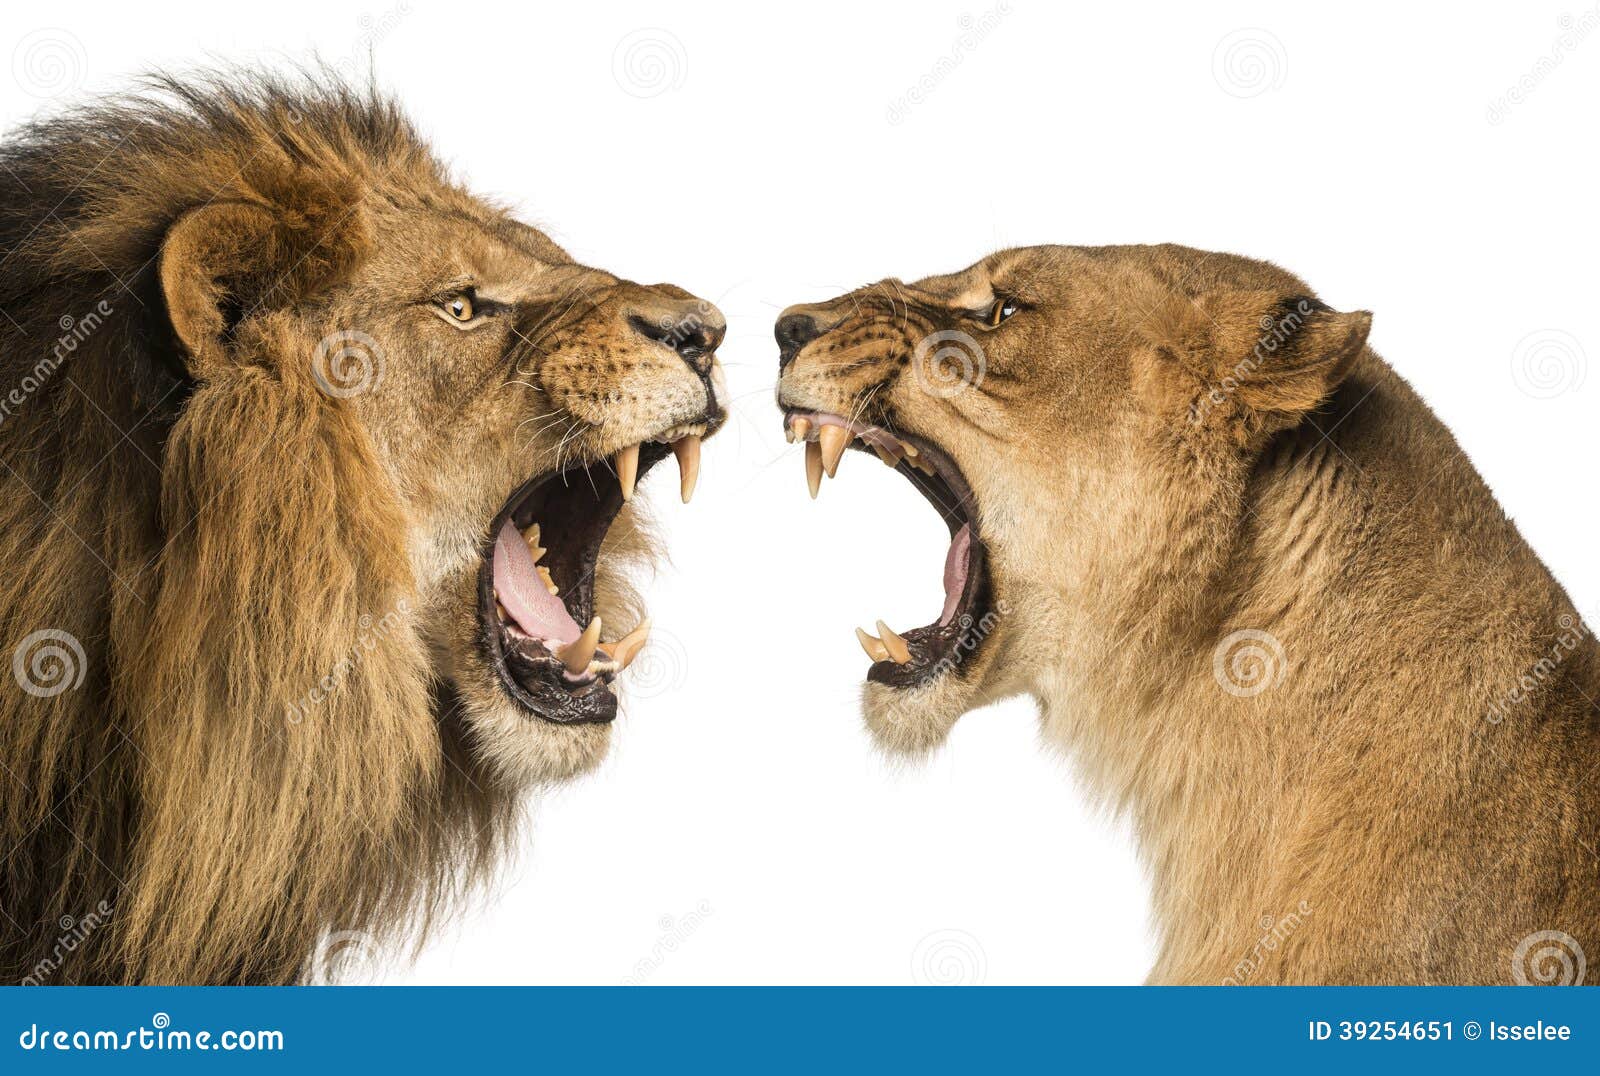 close-up of a lion and lioness roaring